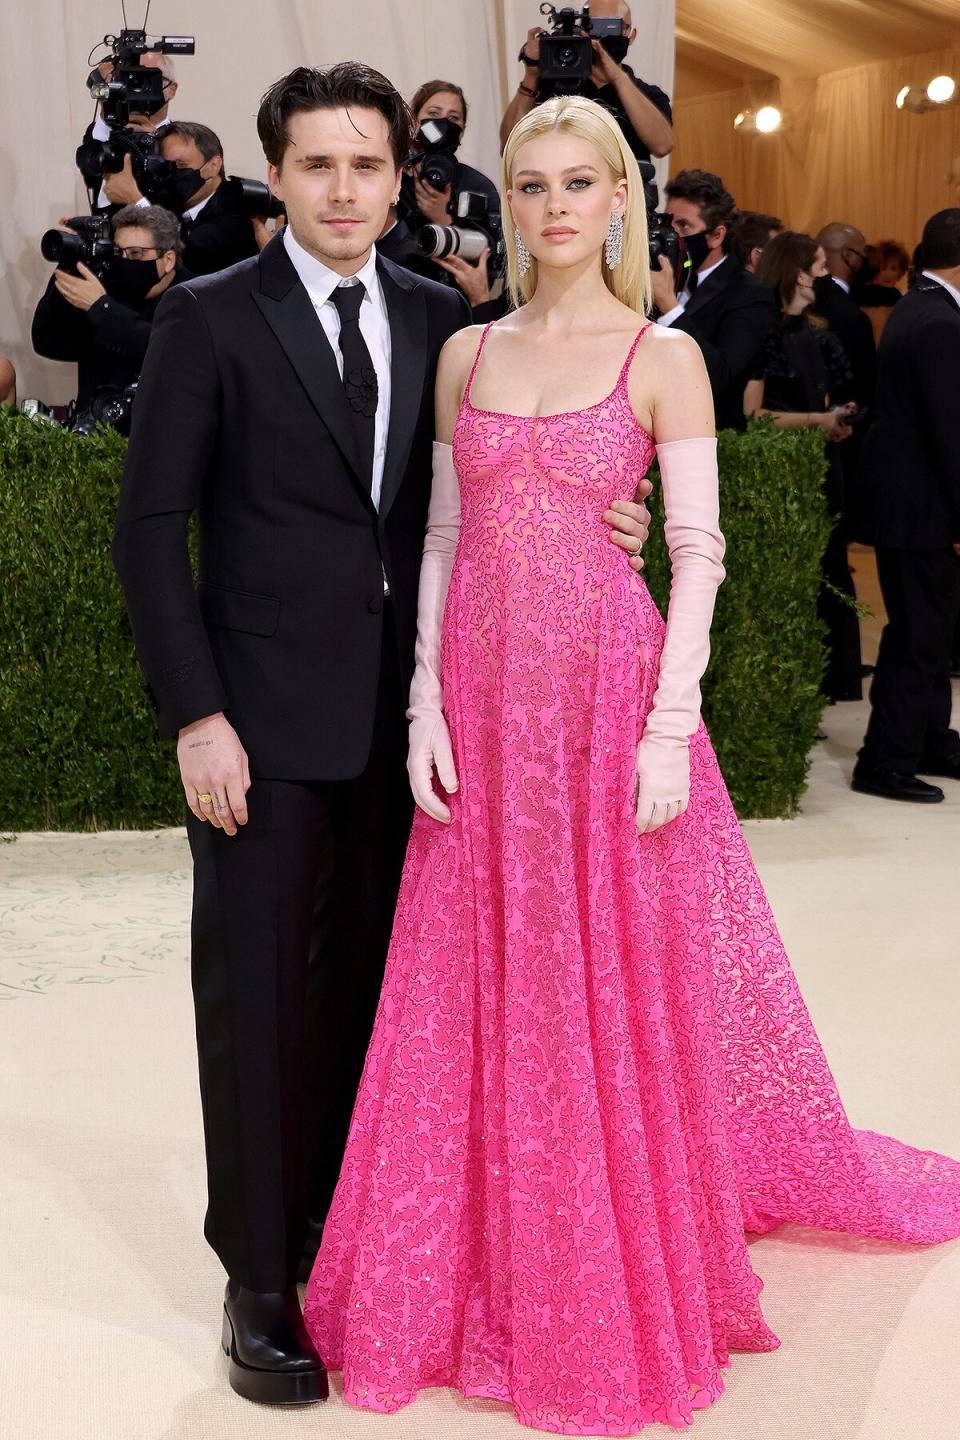 Brooklyn Beckham and Nicola Peltz attend The 2021 Met Gala Celebrating In America: A Lexicon Of Fashion at Metropolitan Museum of Art on September 13, 2021